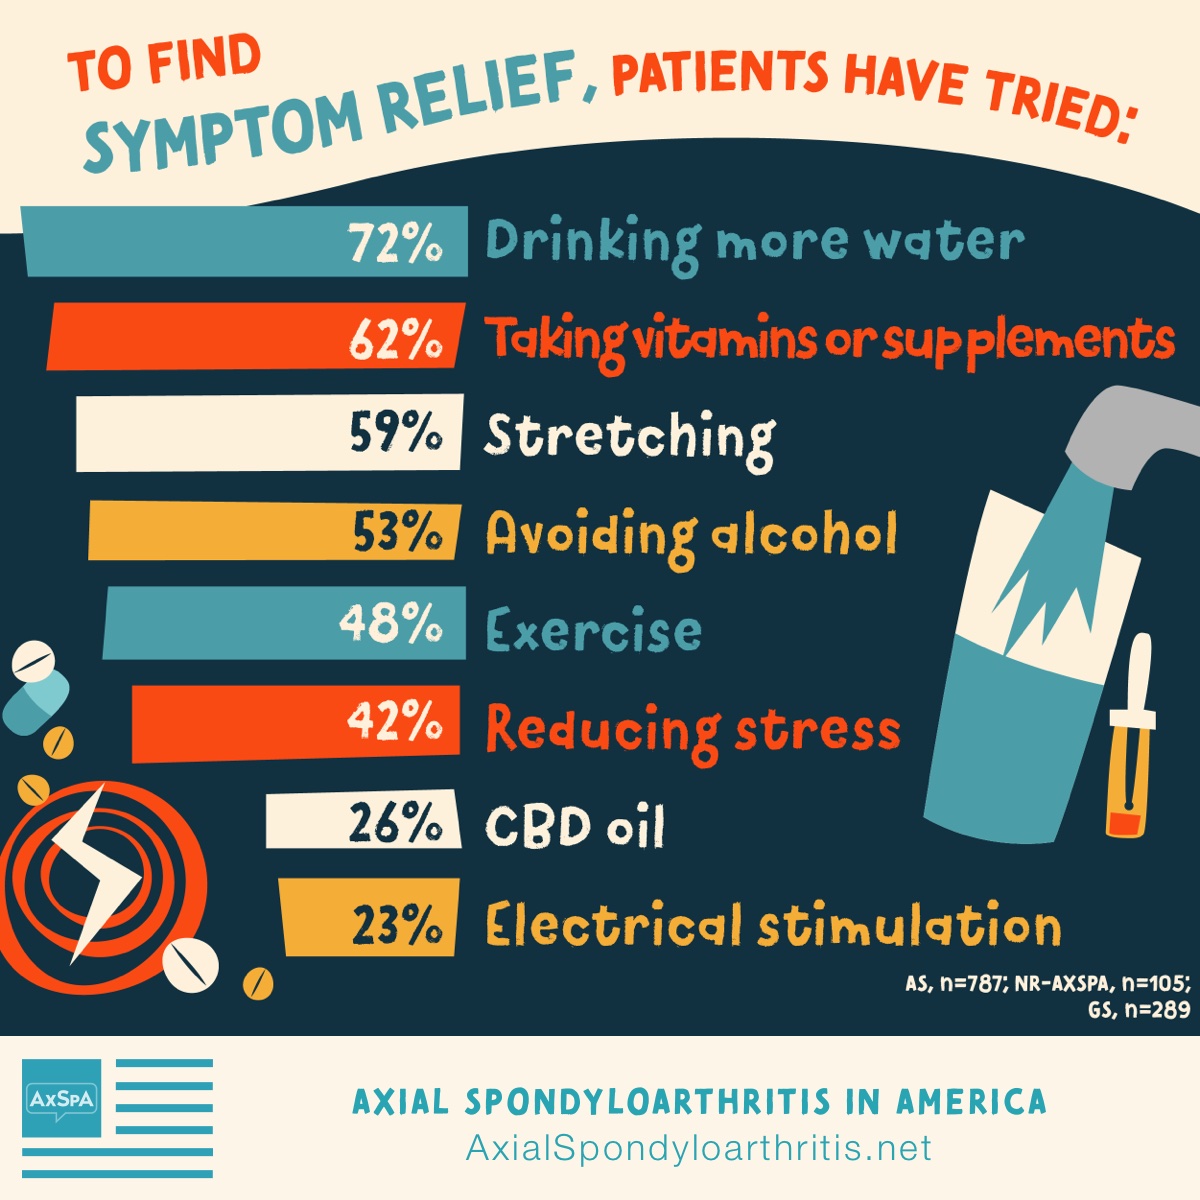 To find symptom relief, patients have tried drinking more water, taking vitamins, stretching, avoiding alcohol, exercise, reducing stress, and CBD oil.